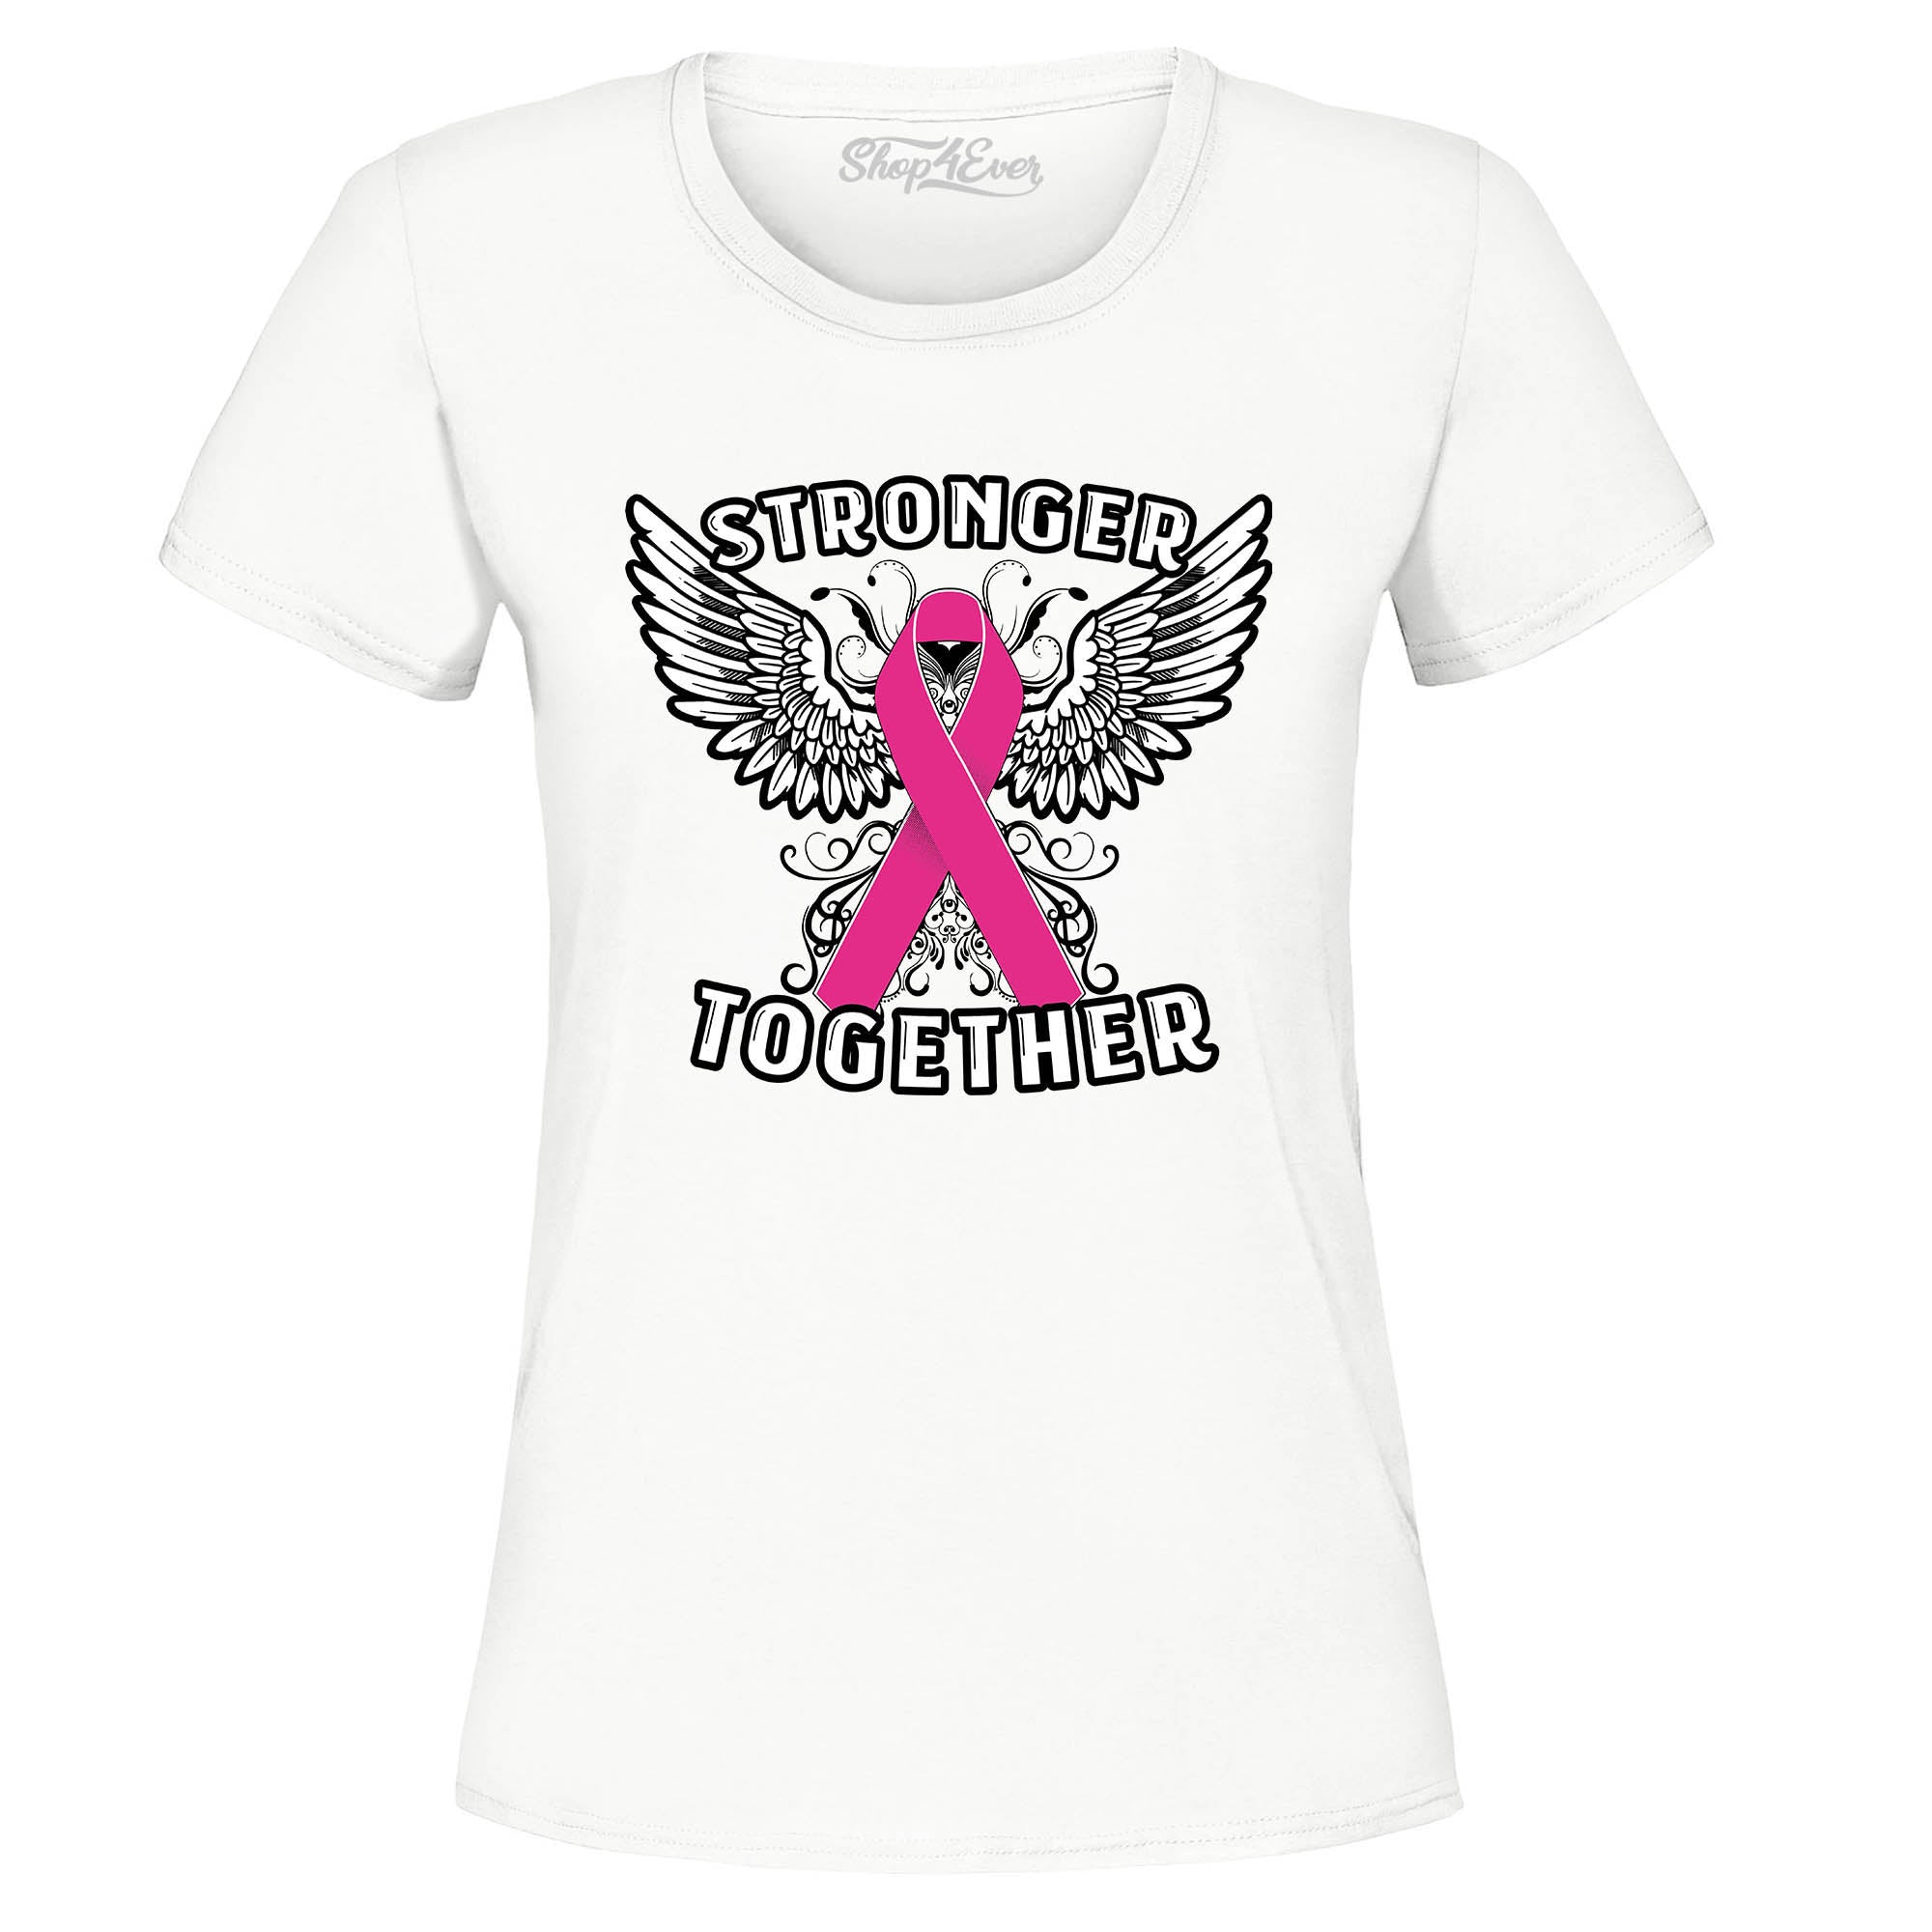 Stronger Together Breast Cancer Ribbon Women's T-Shirt Support Awareness Tee